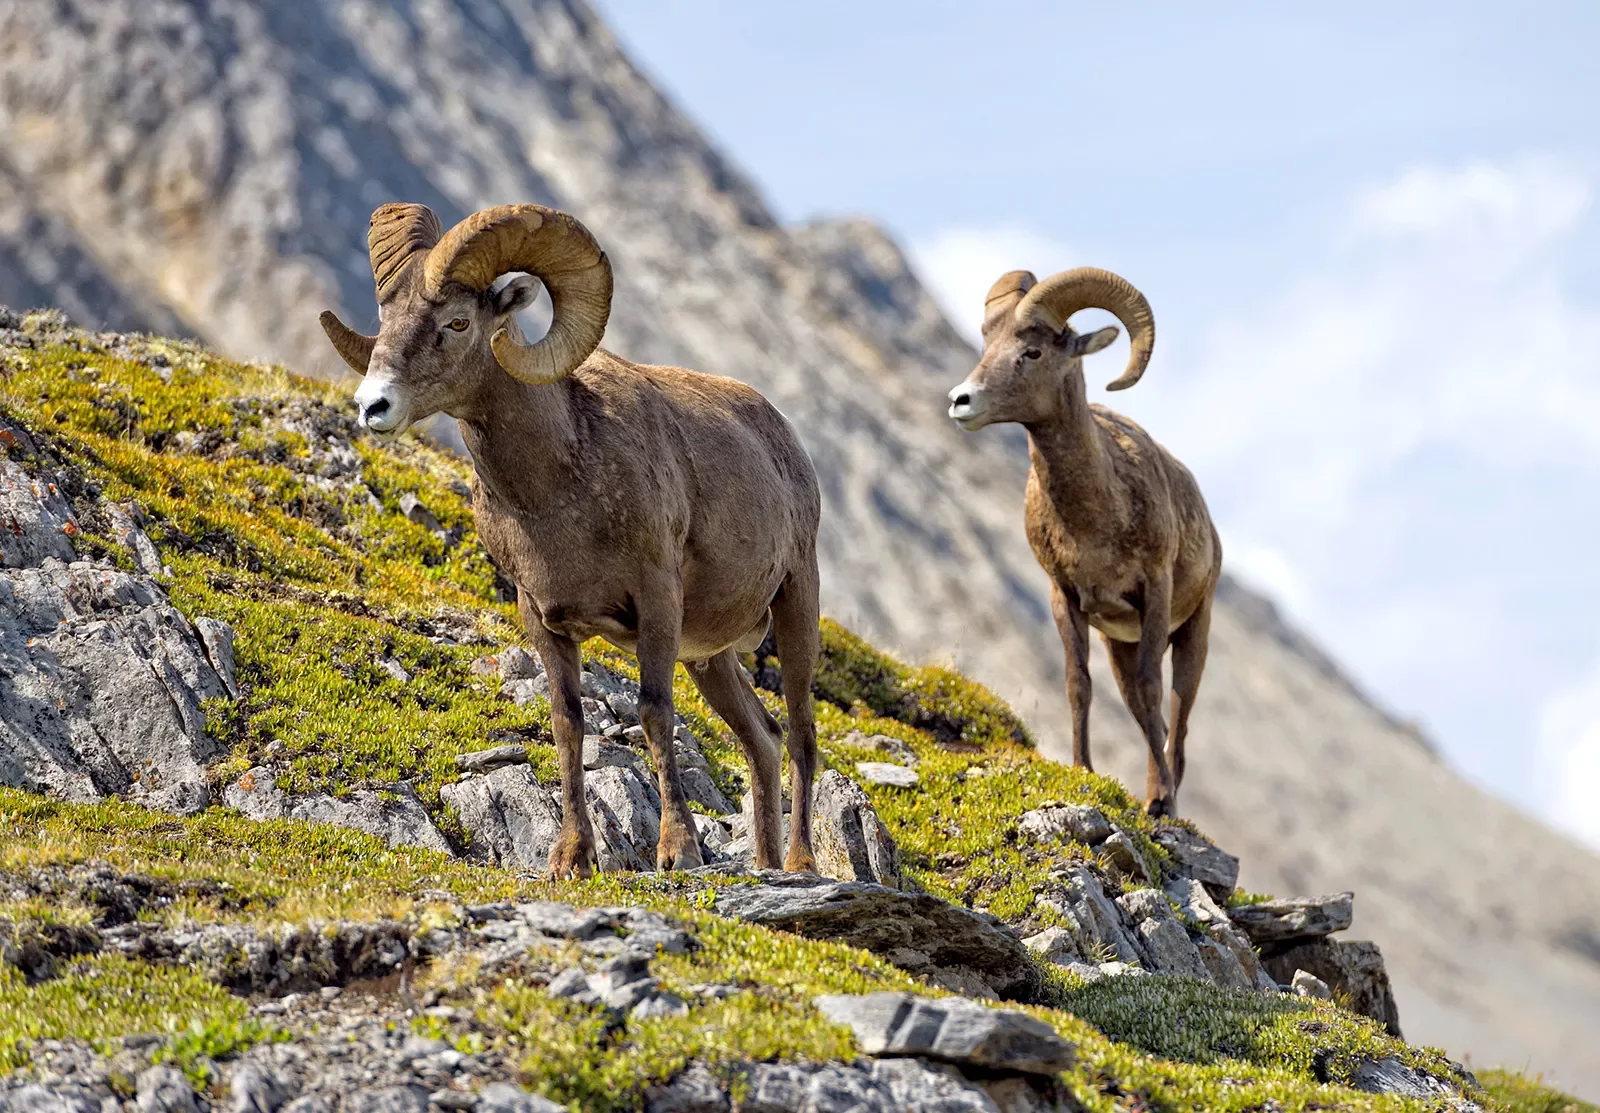 Close-up of two Bighorns, walking on mountainside.